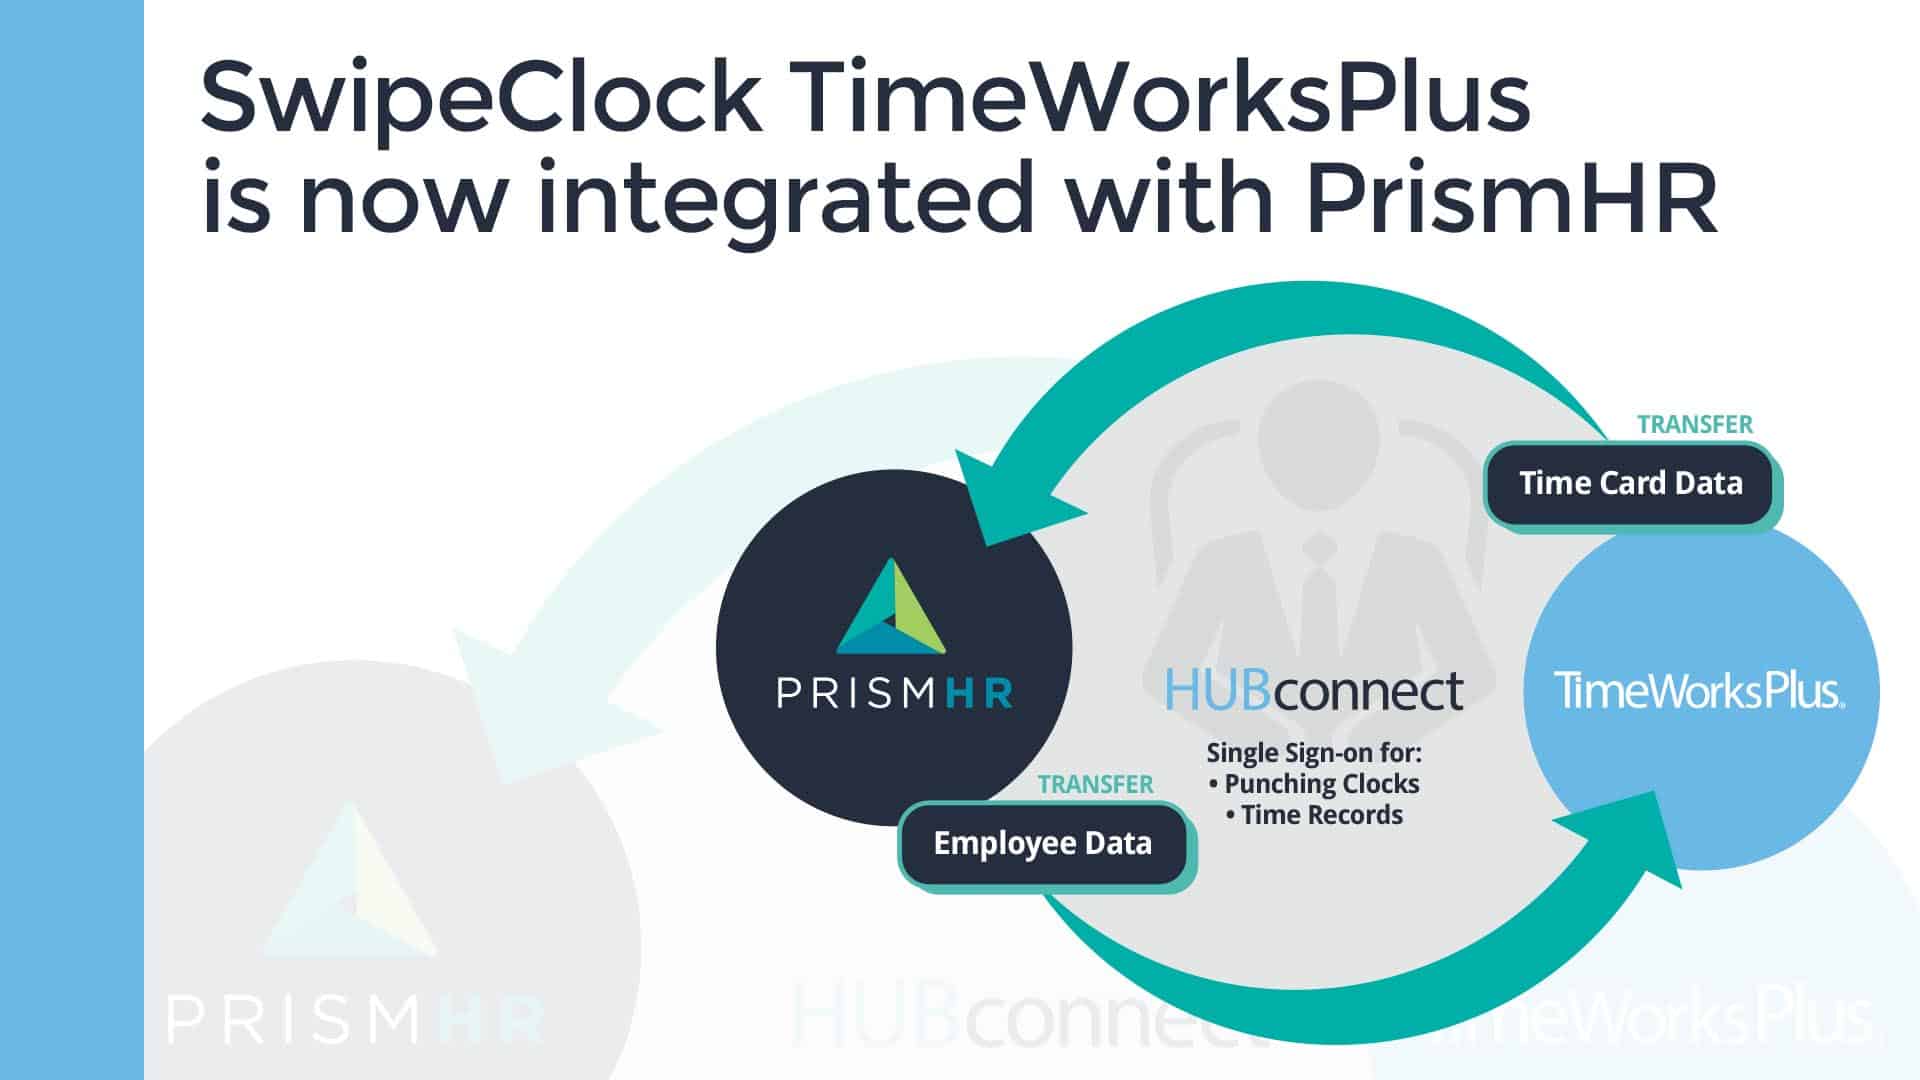 Streamlined Workforce Management Solutions from SwipeClock Now Integrated with PrismHR